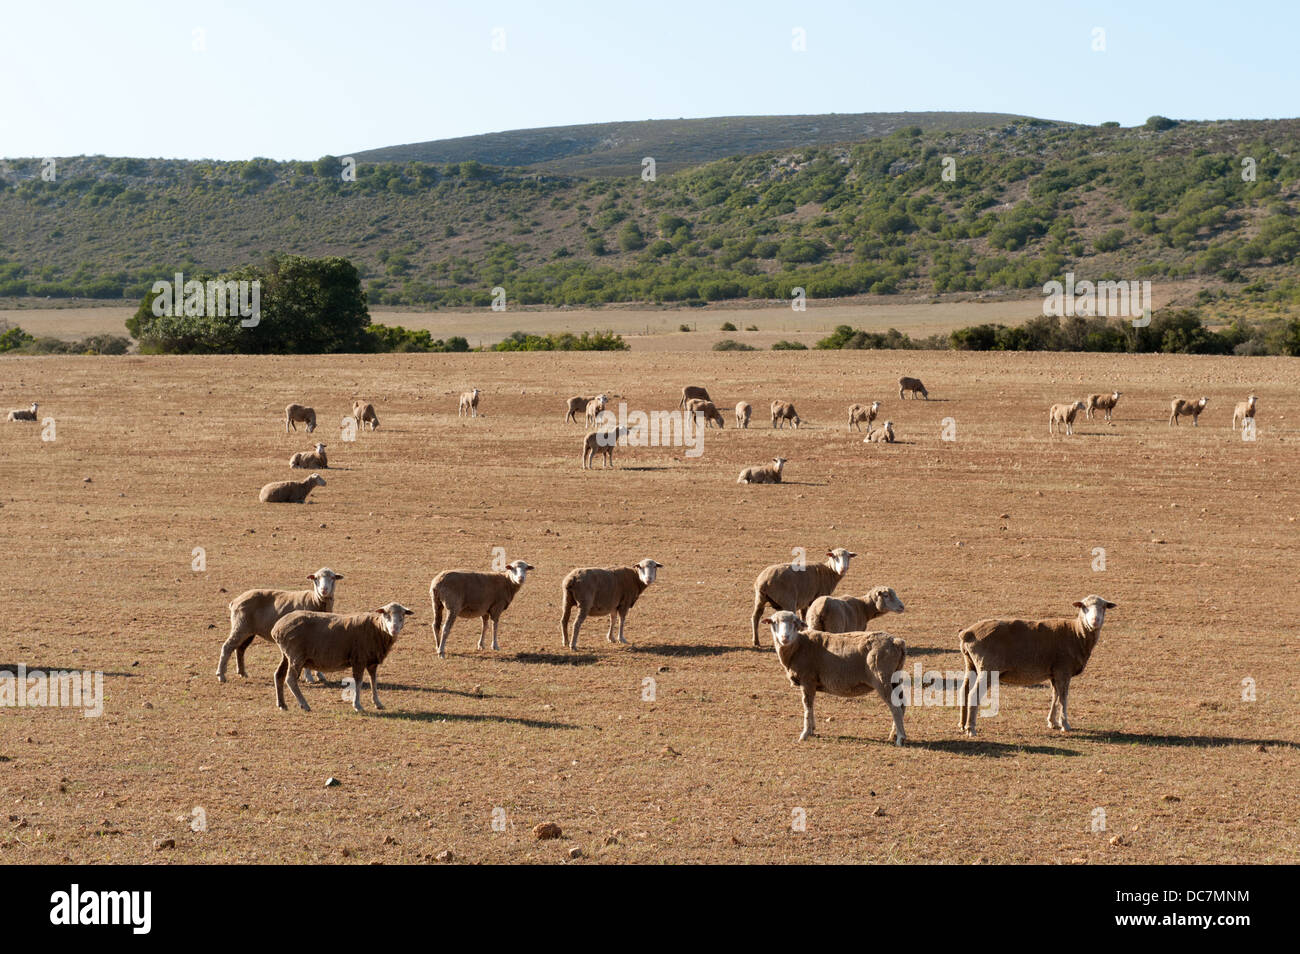 Sheep farm in the Overberg region, Western Cape, South Africa Stock Photo